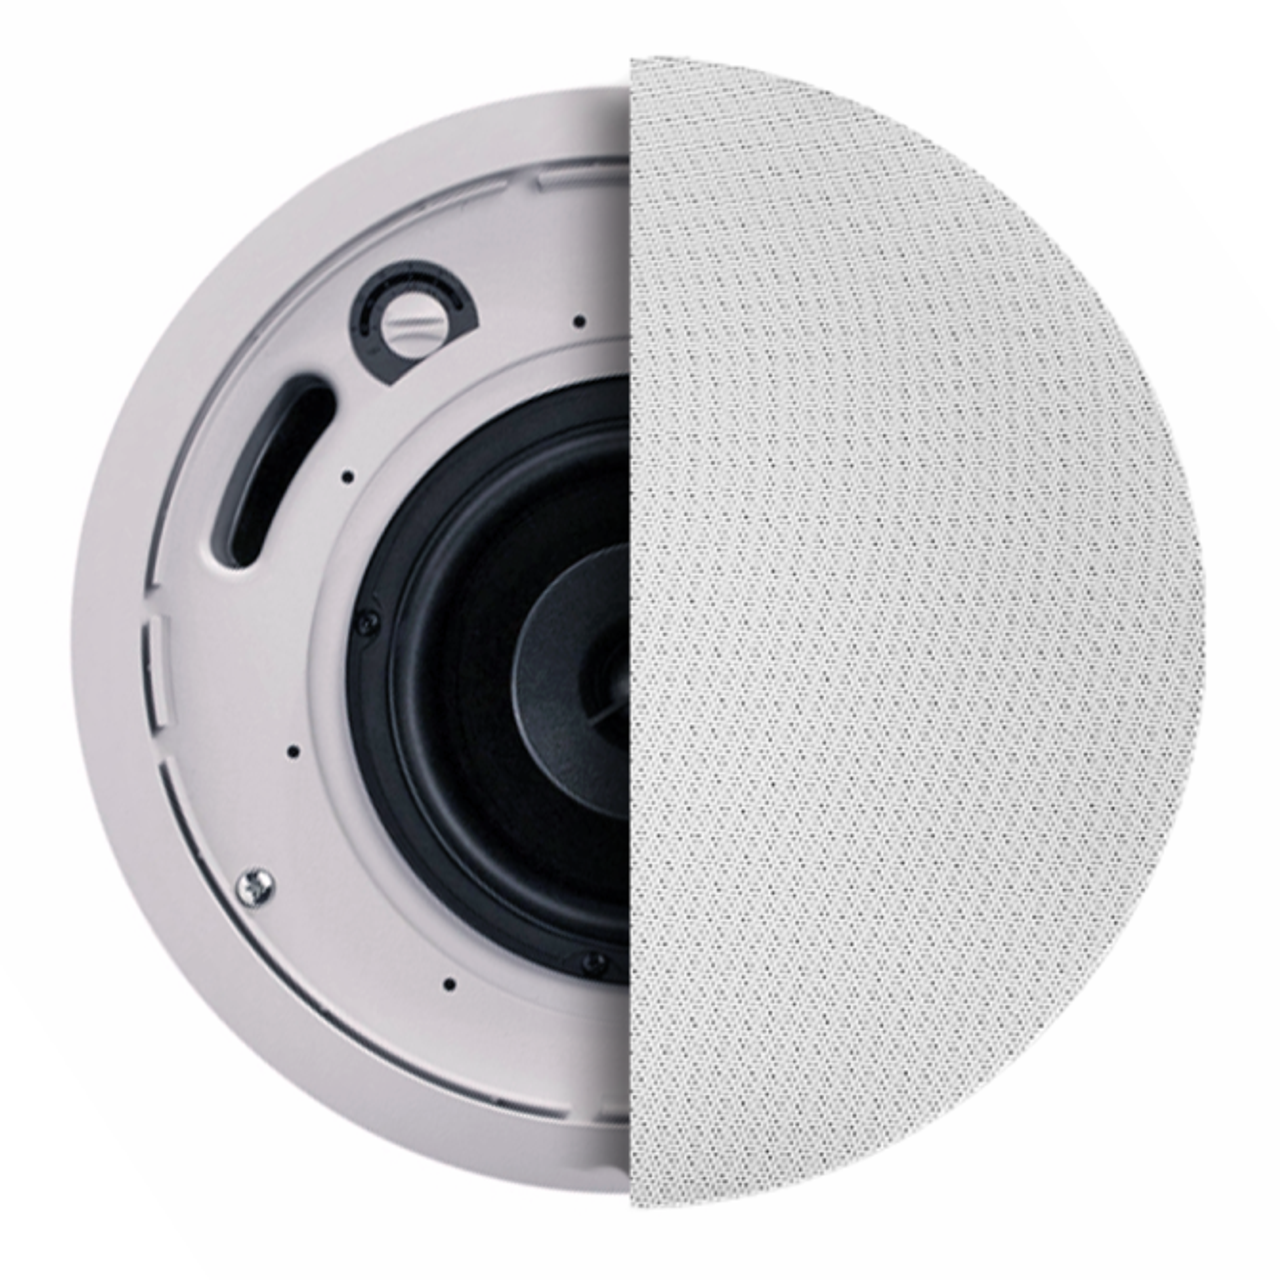 SoundTube IPD4-CM62-BGM-II-WH IP-Addressable, 4-Channel In-Ceiling Speaker with Seamless Magnetic Grille (IPD4-CM62-BGM-II-WH)